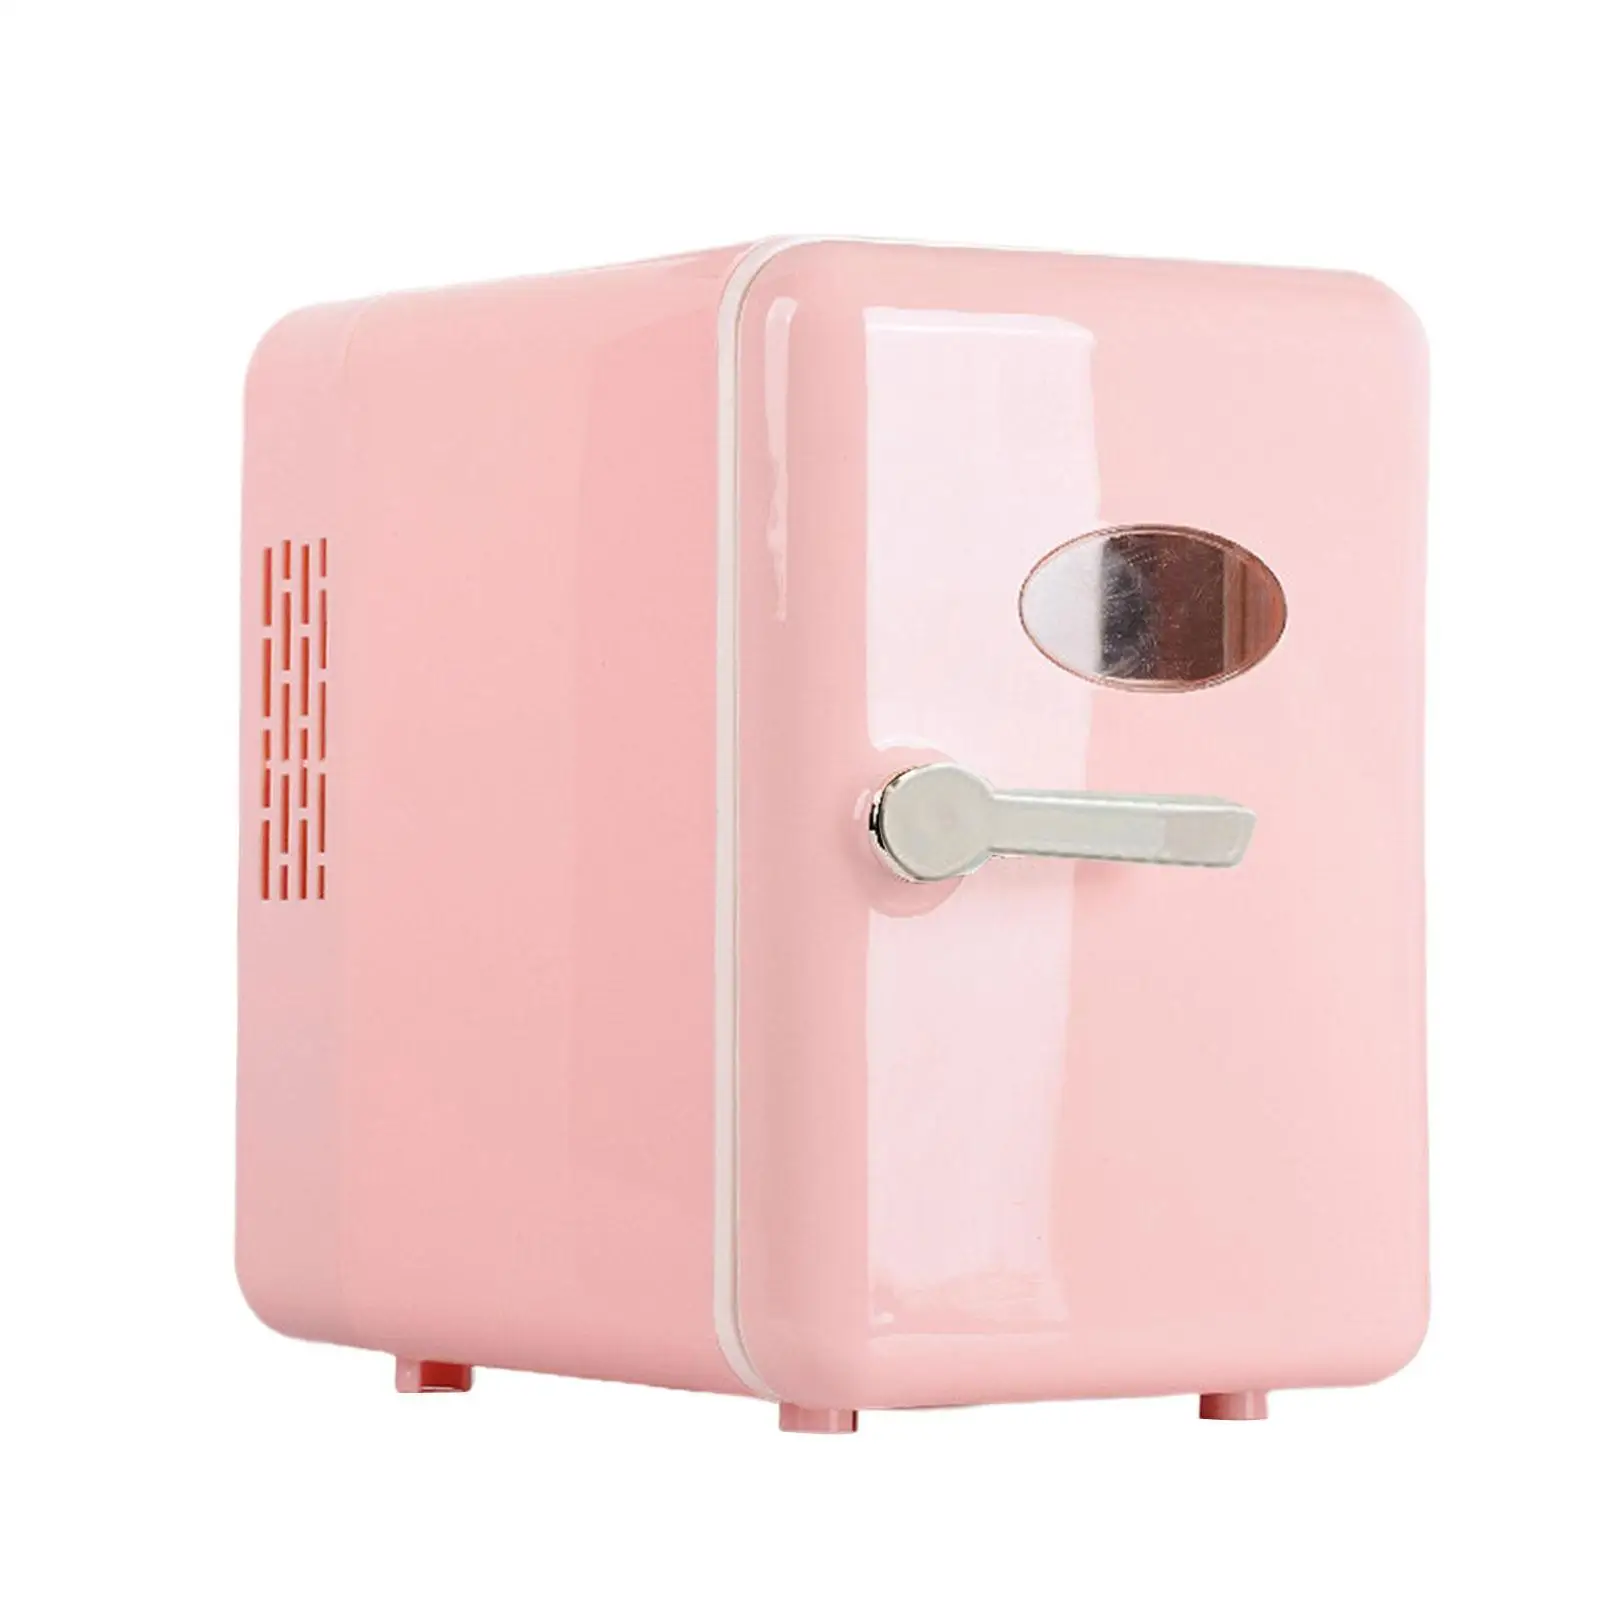 Portable Refrigerator Uk 220v Pink Desktop Accessory Sturdy Cute For Storing Small Food Items And Drinks